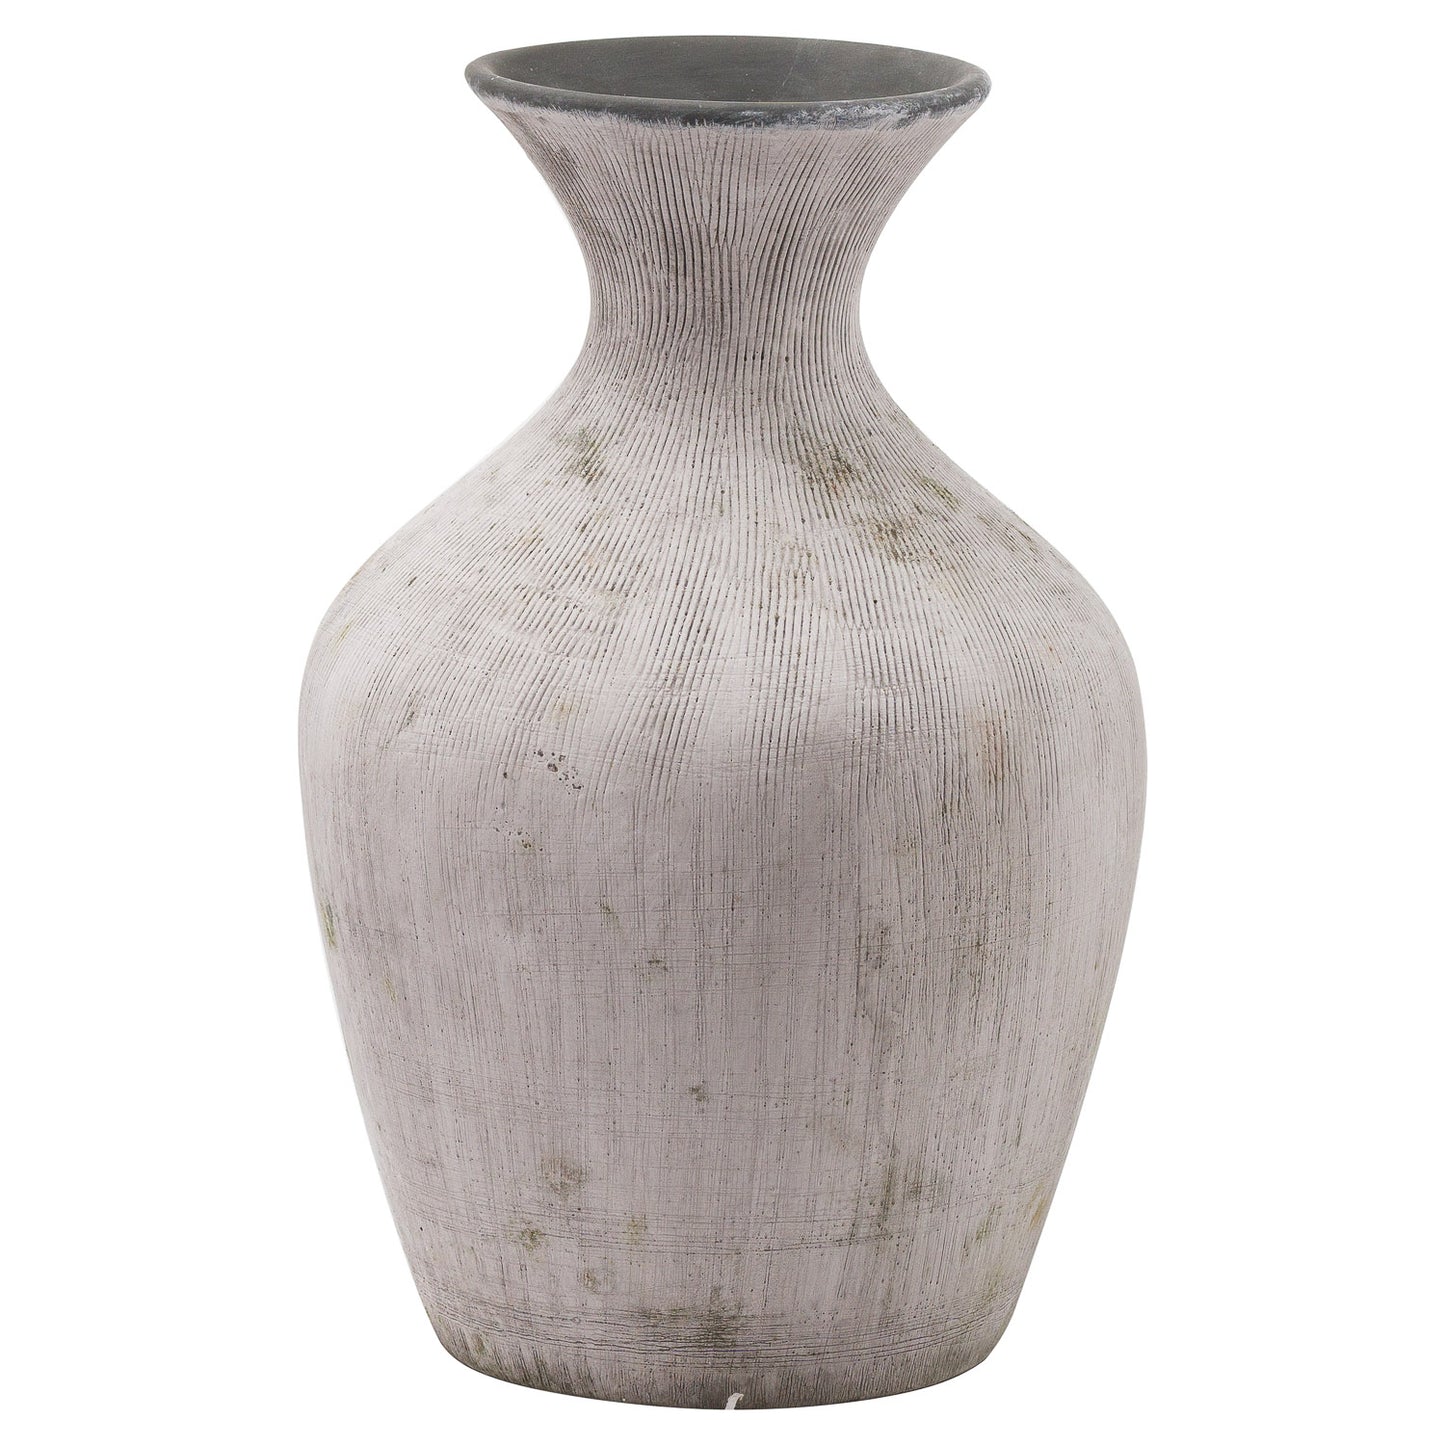 Stone Vase - Different sizes and shapes